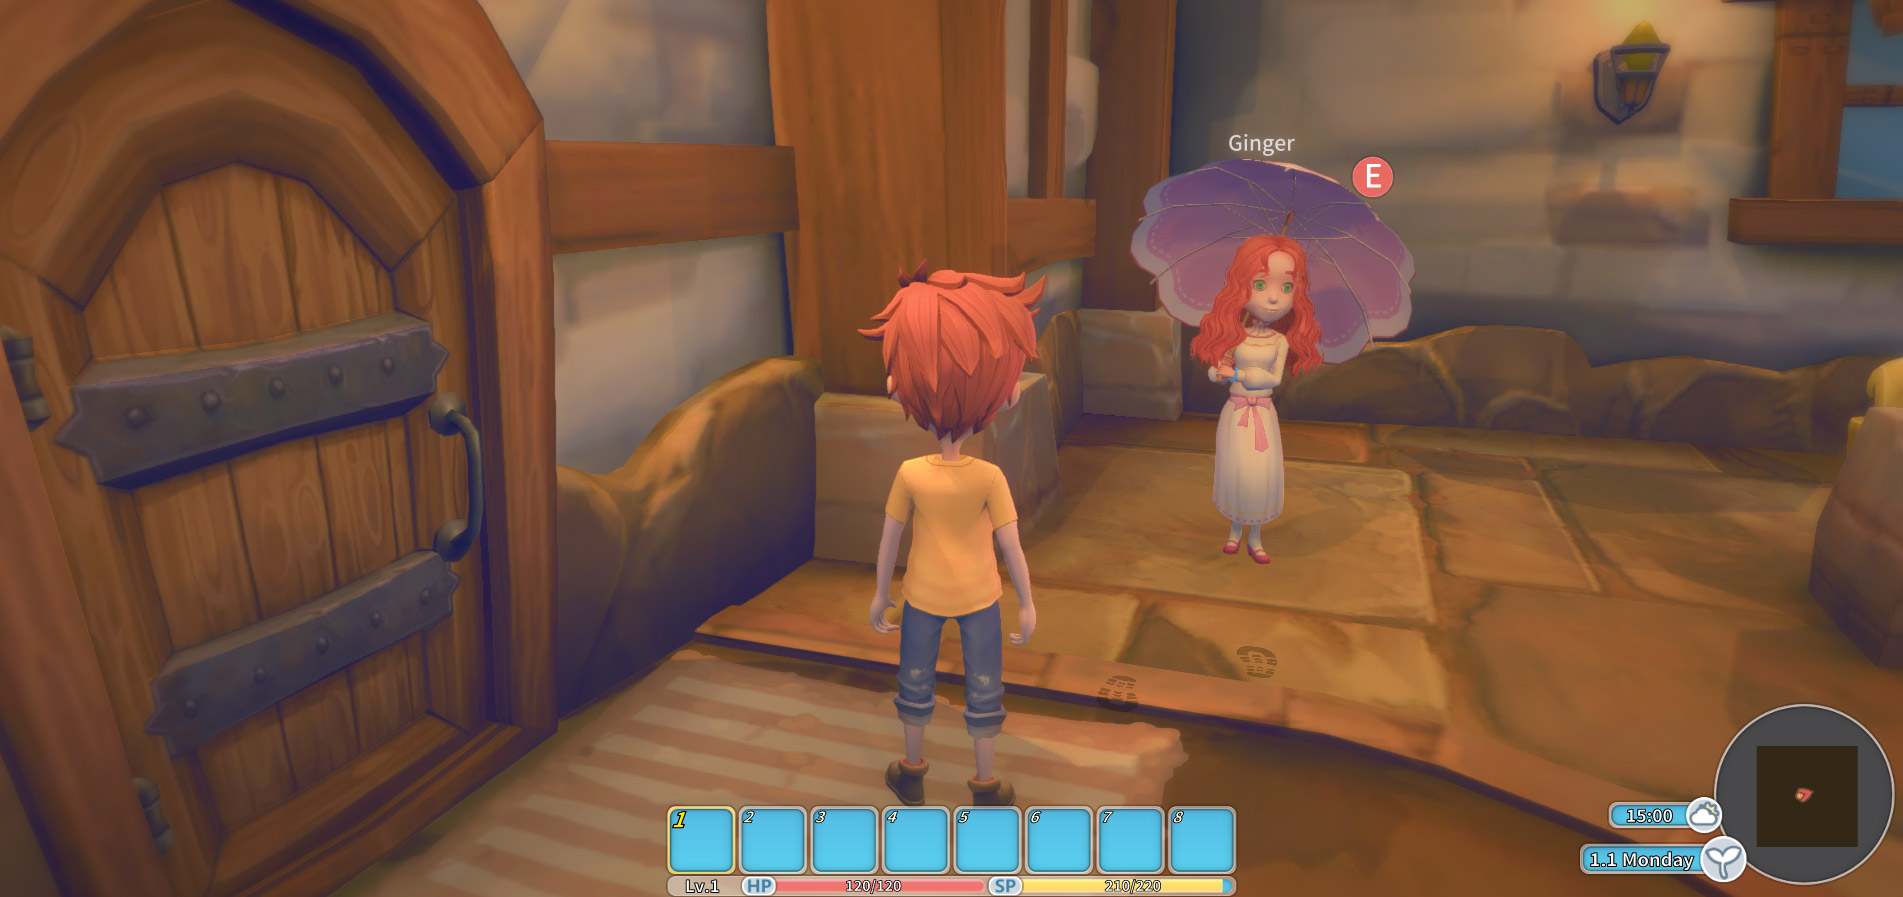 Moving Ahead news My Time At Portia Mod DB. 